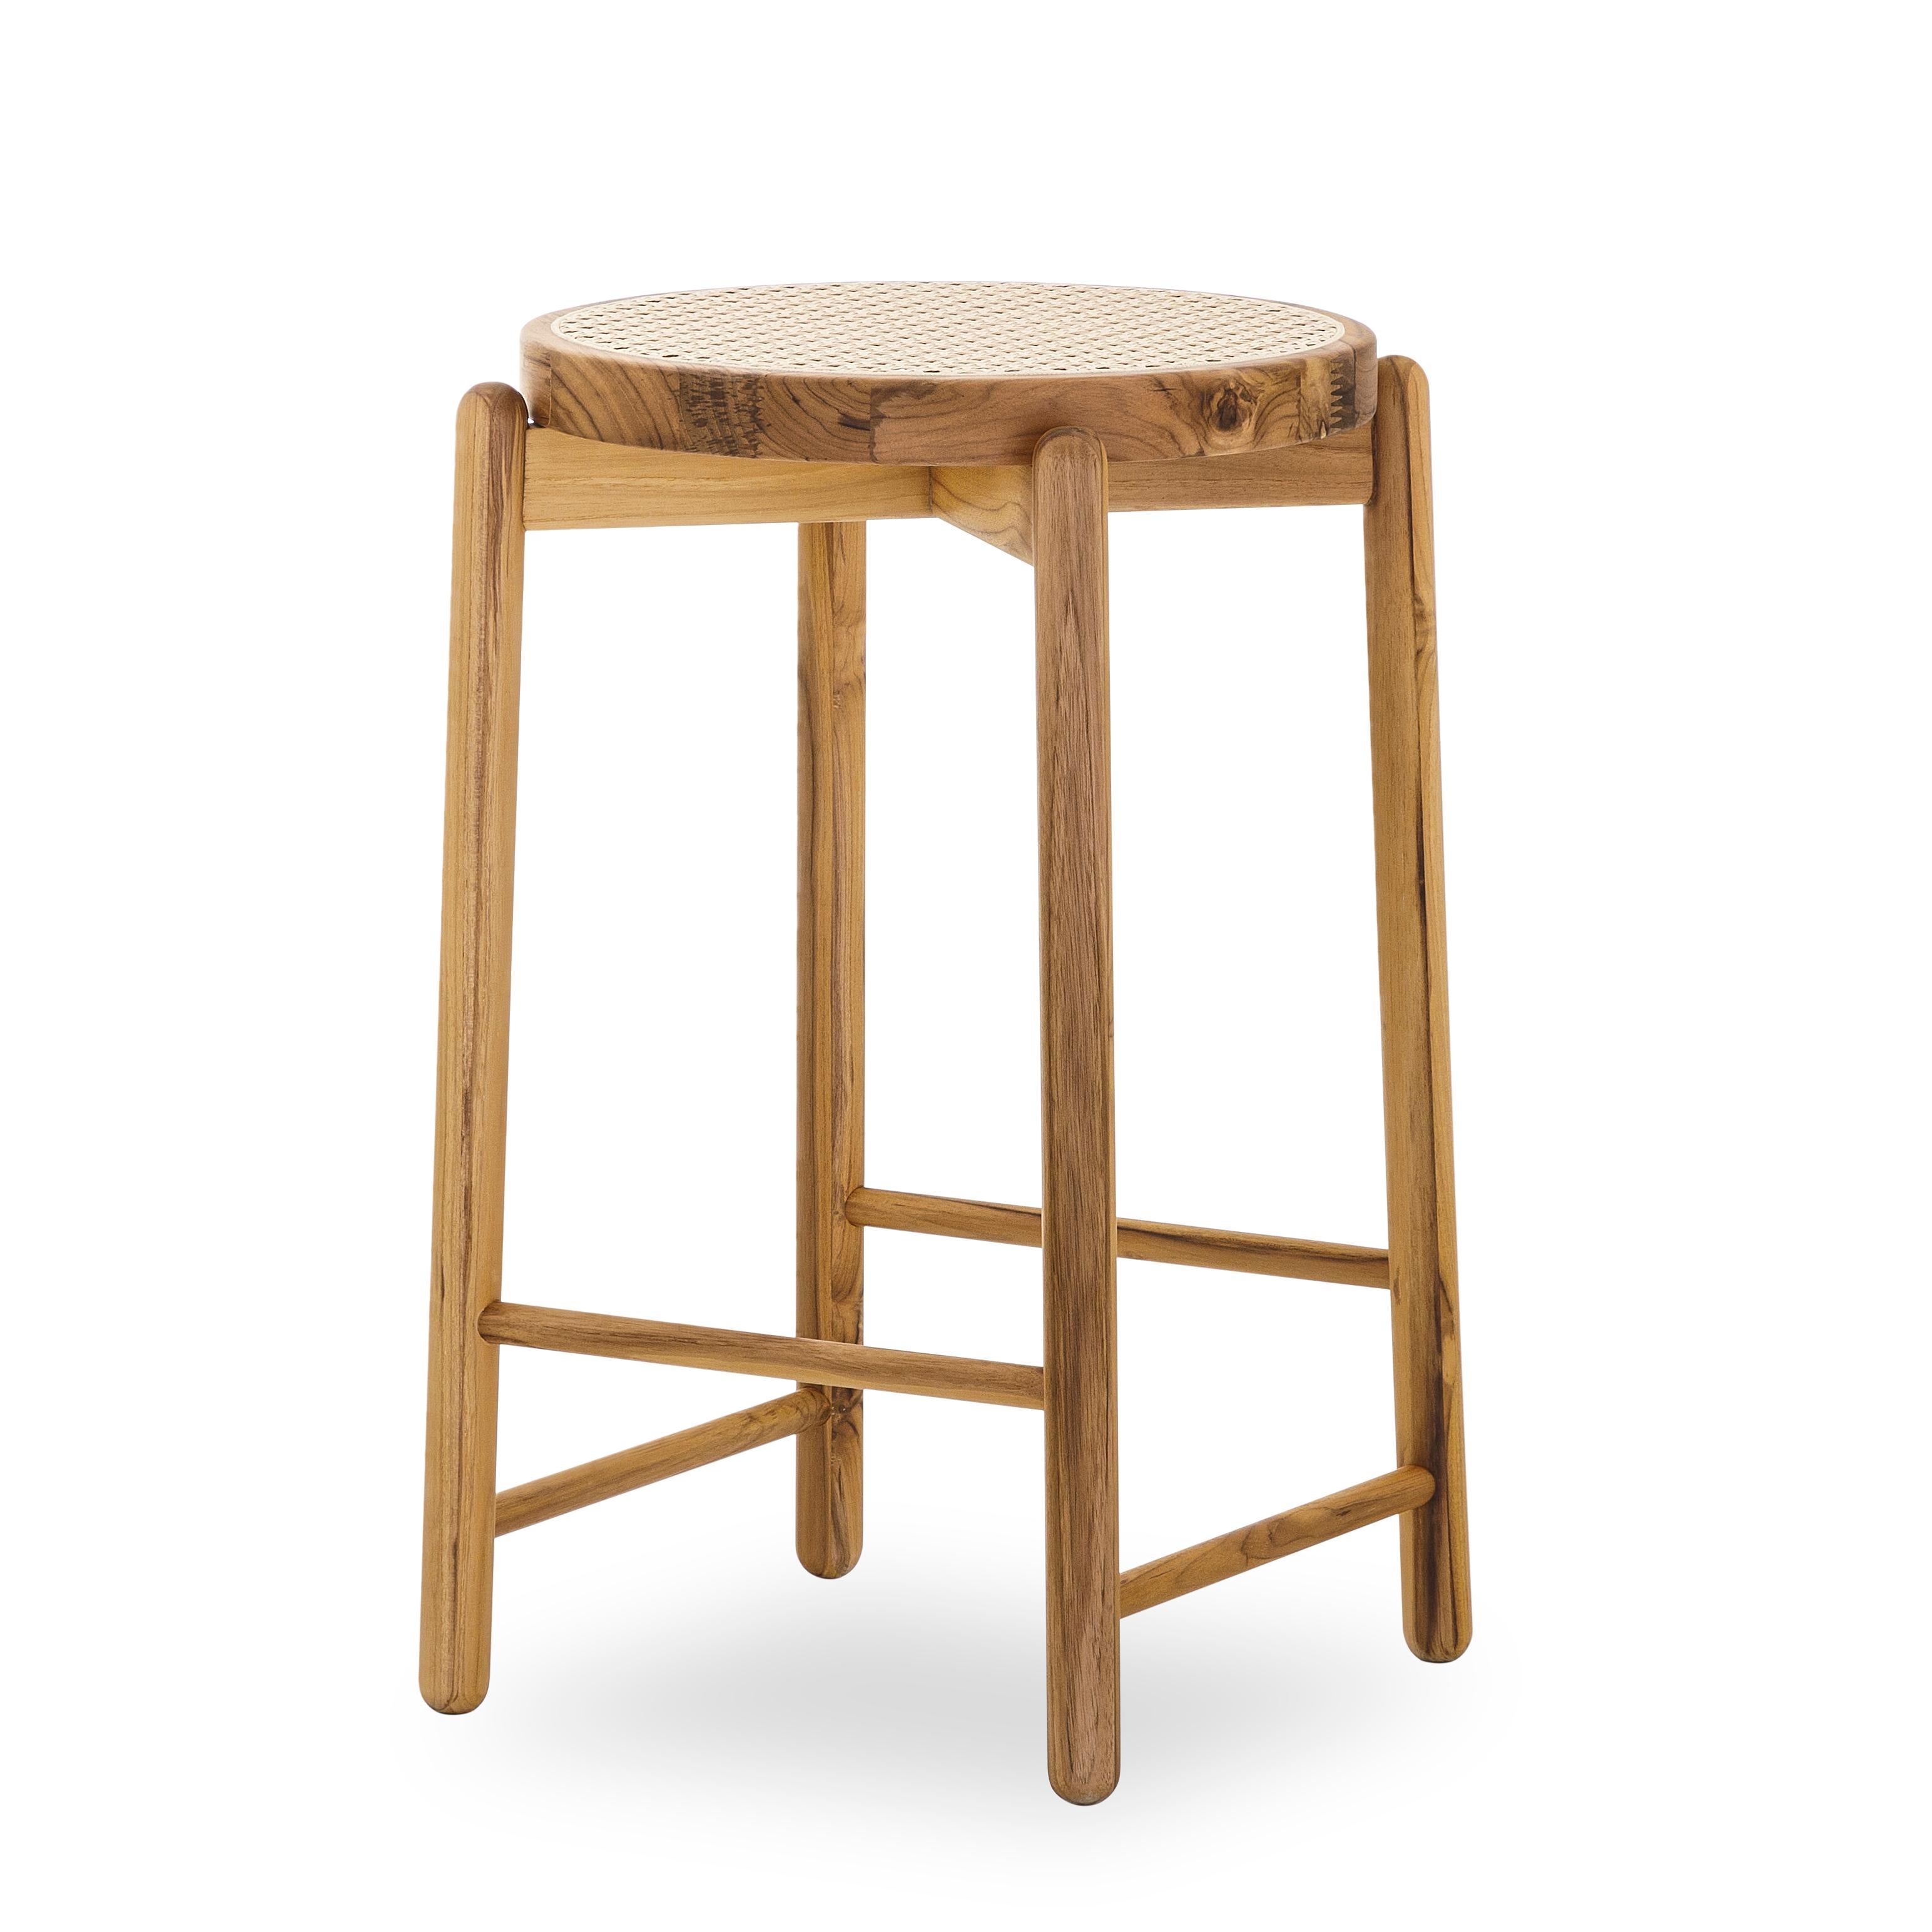 Our Uultis team has designed this Maru counter stool in a teak wood base with a cane seat that it will stop being only a decoration counter stool to become part of the day-to-day lives of those who experience enriching cultural activities. The Maru